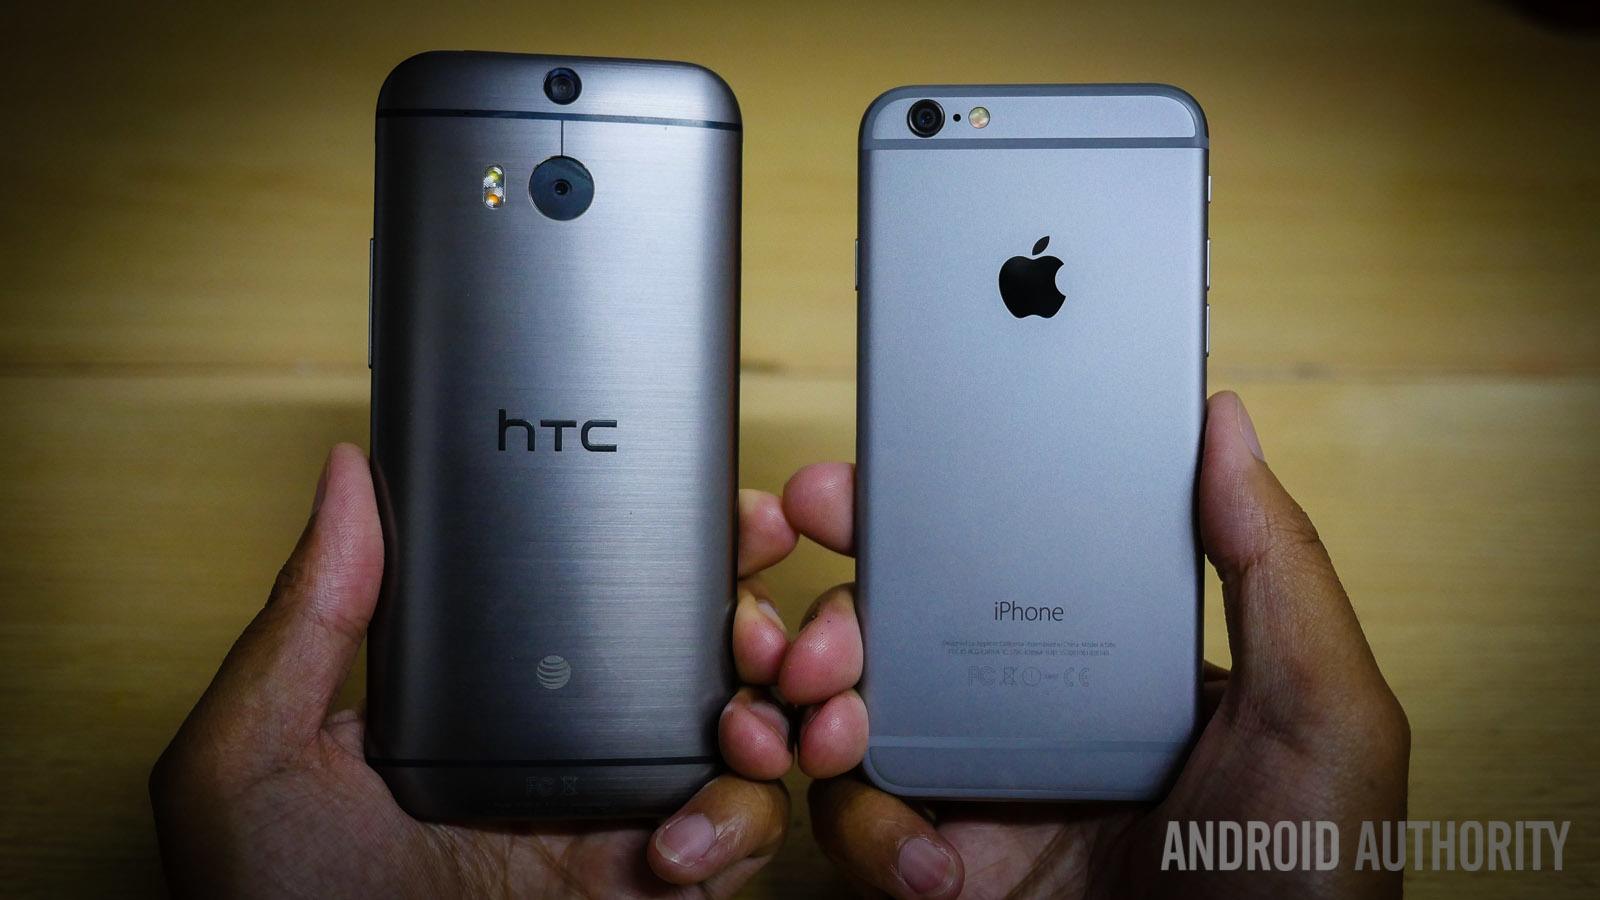 iphone 6 plus vs htc one m8 quick look aa (12 of 14)